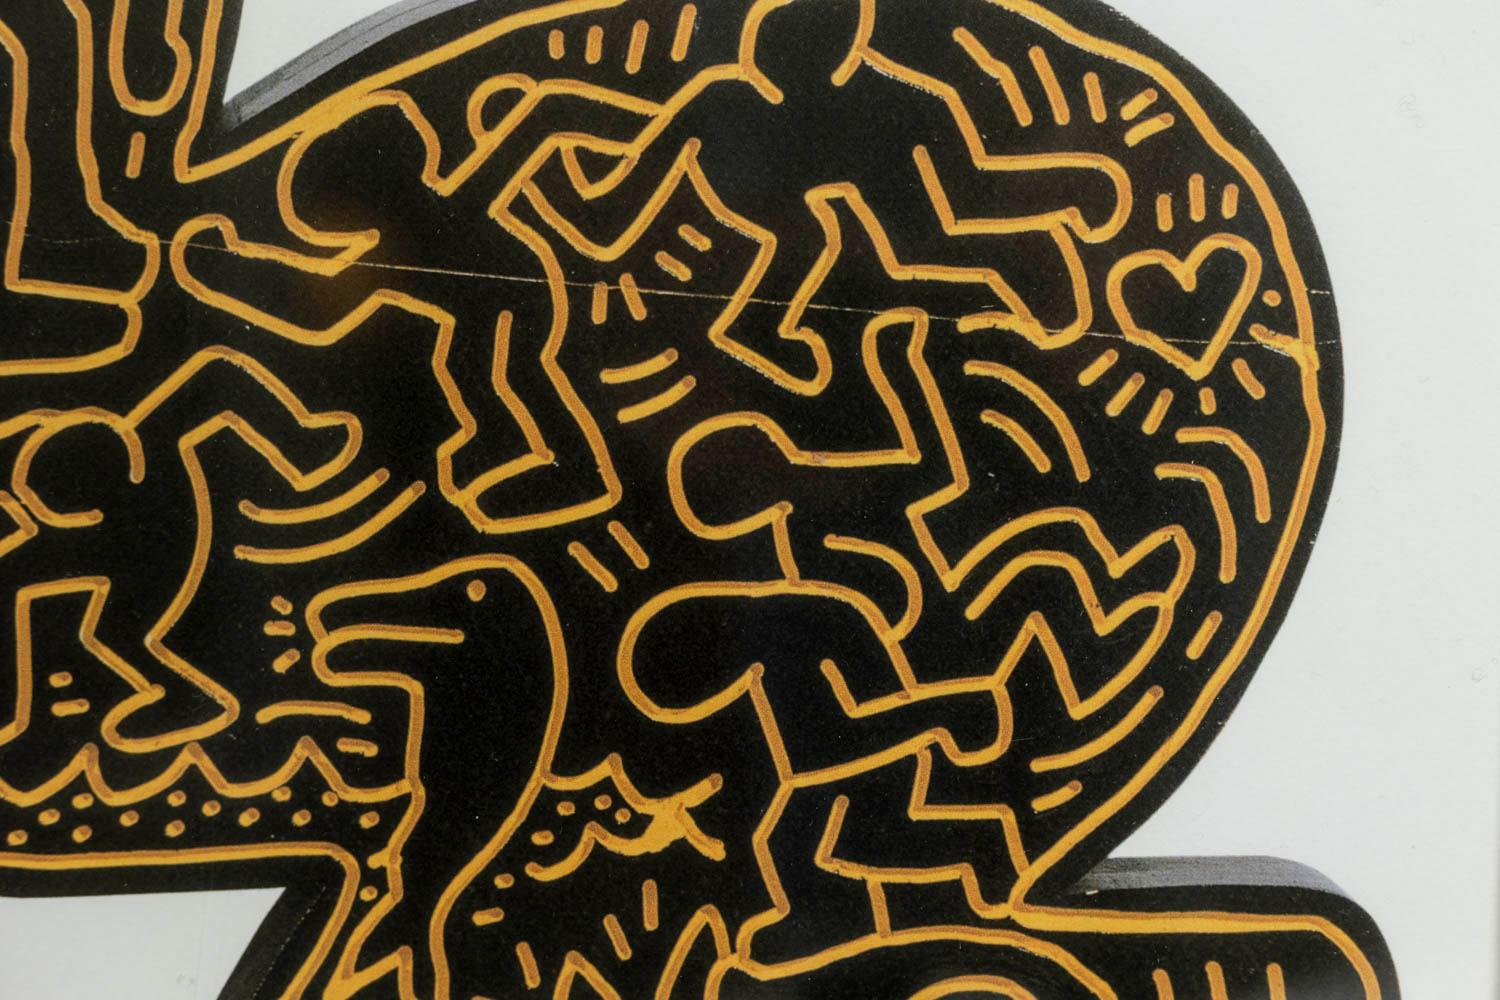 Américain Keith Haring, lithographie, années 1990